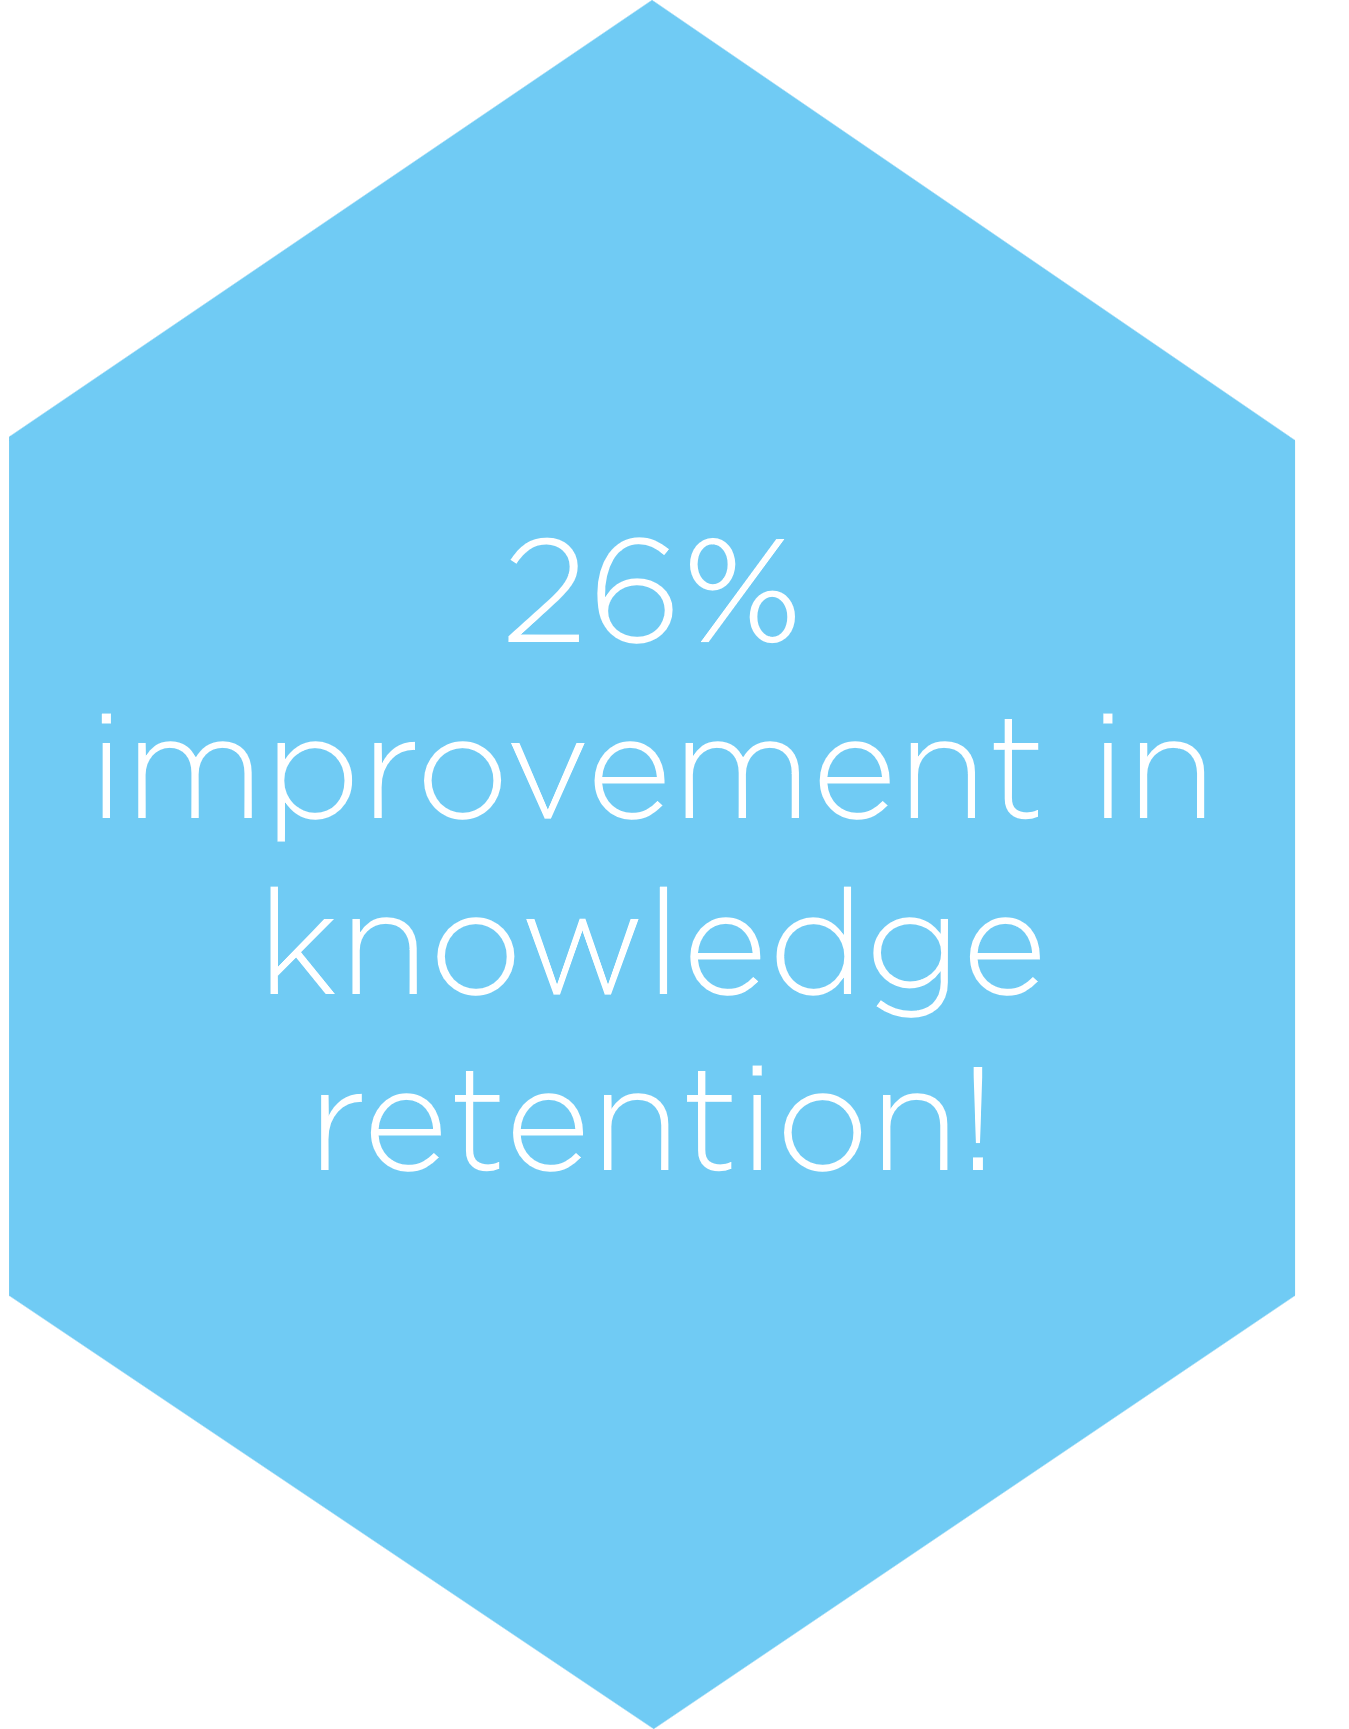 Hexagon with text "26% improvement in knowledge retention"